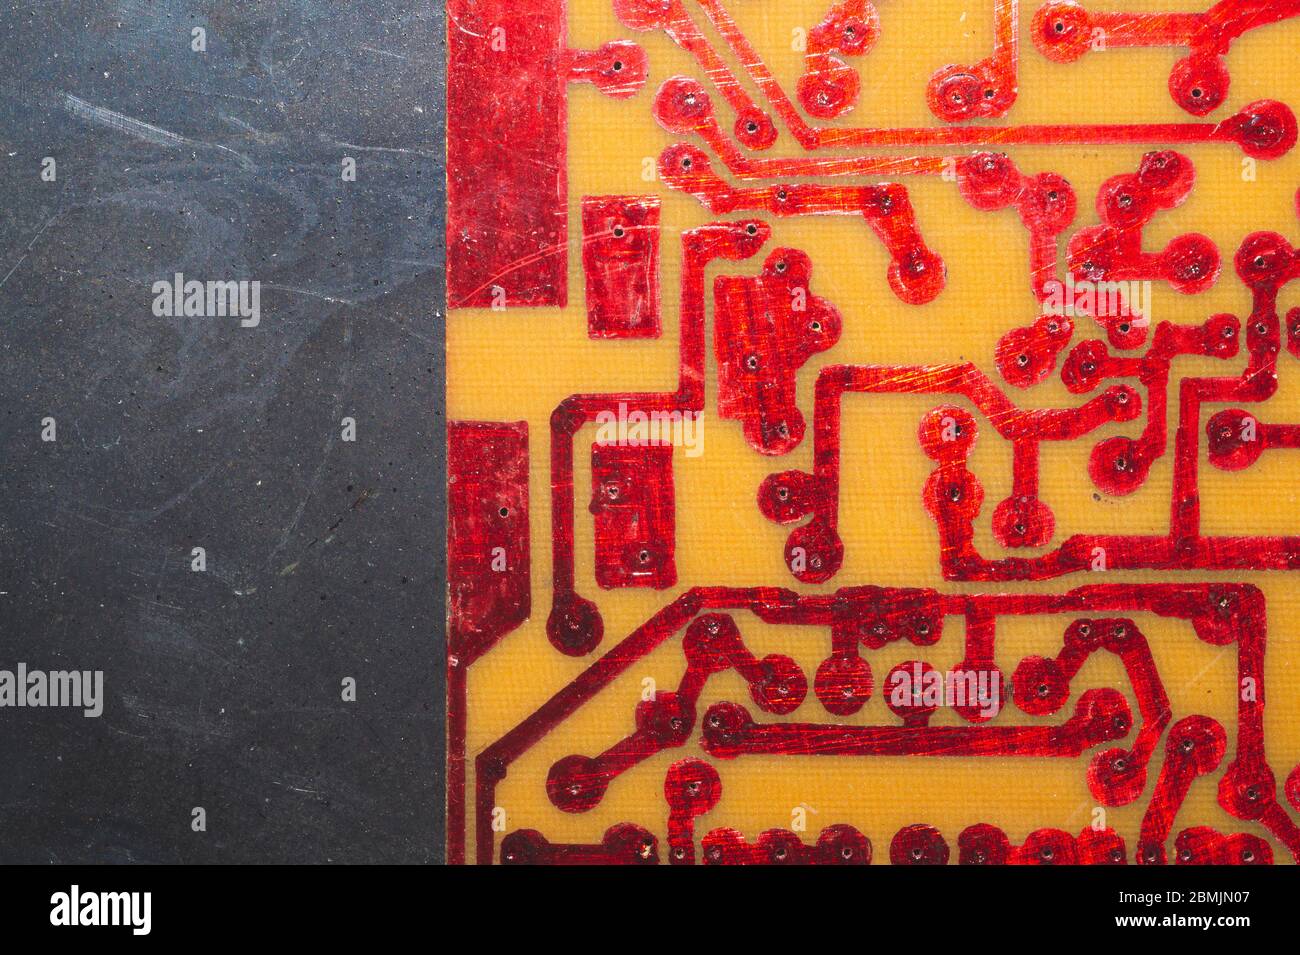 Handmade circuit board with red soldered tracks. industrial background. textolite with soldering Stock Photo